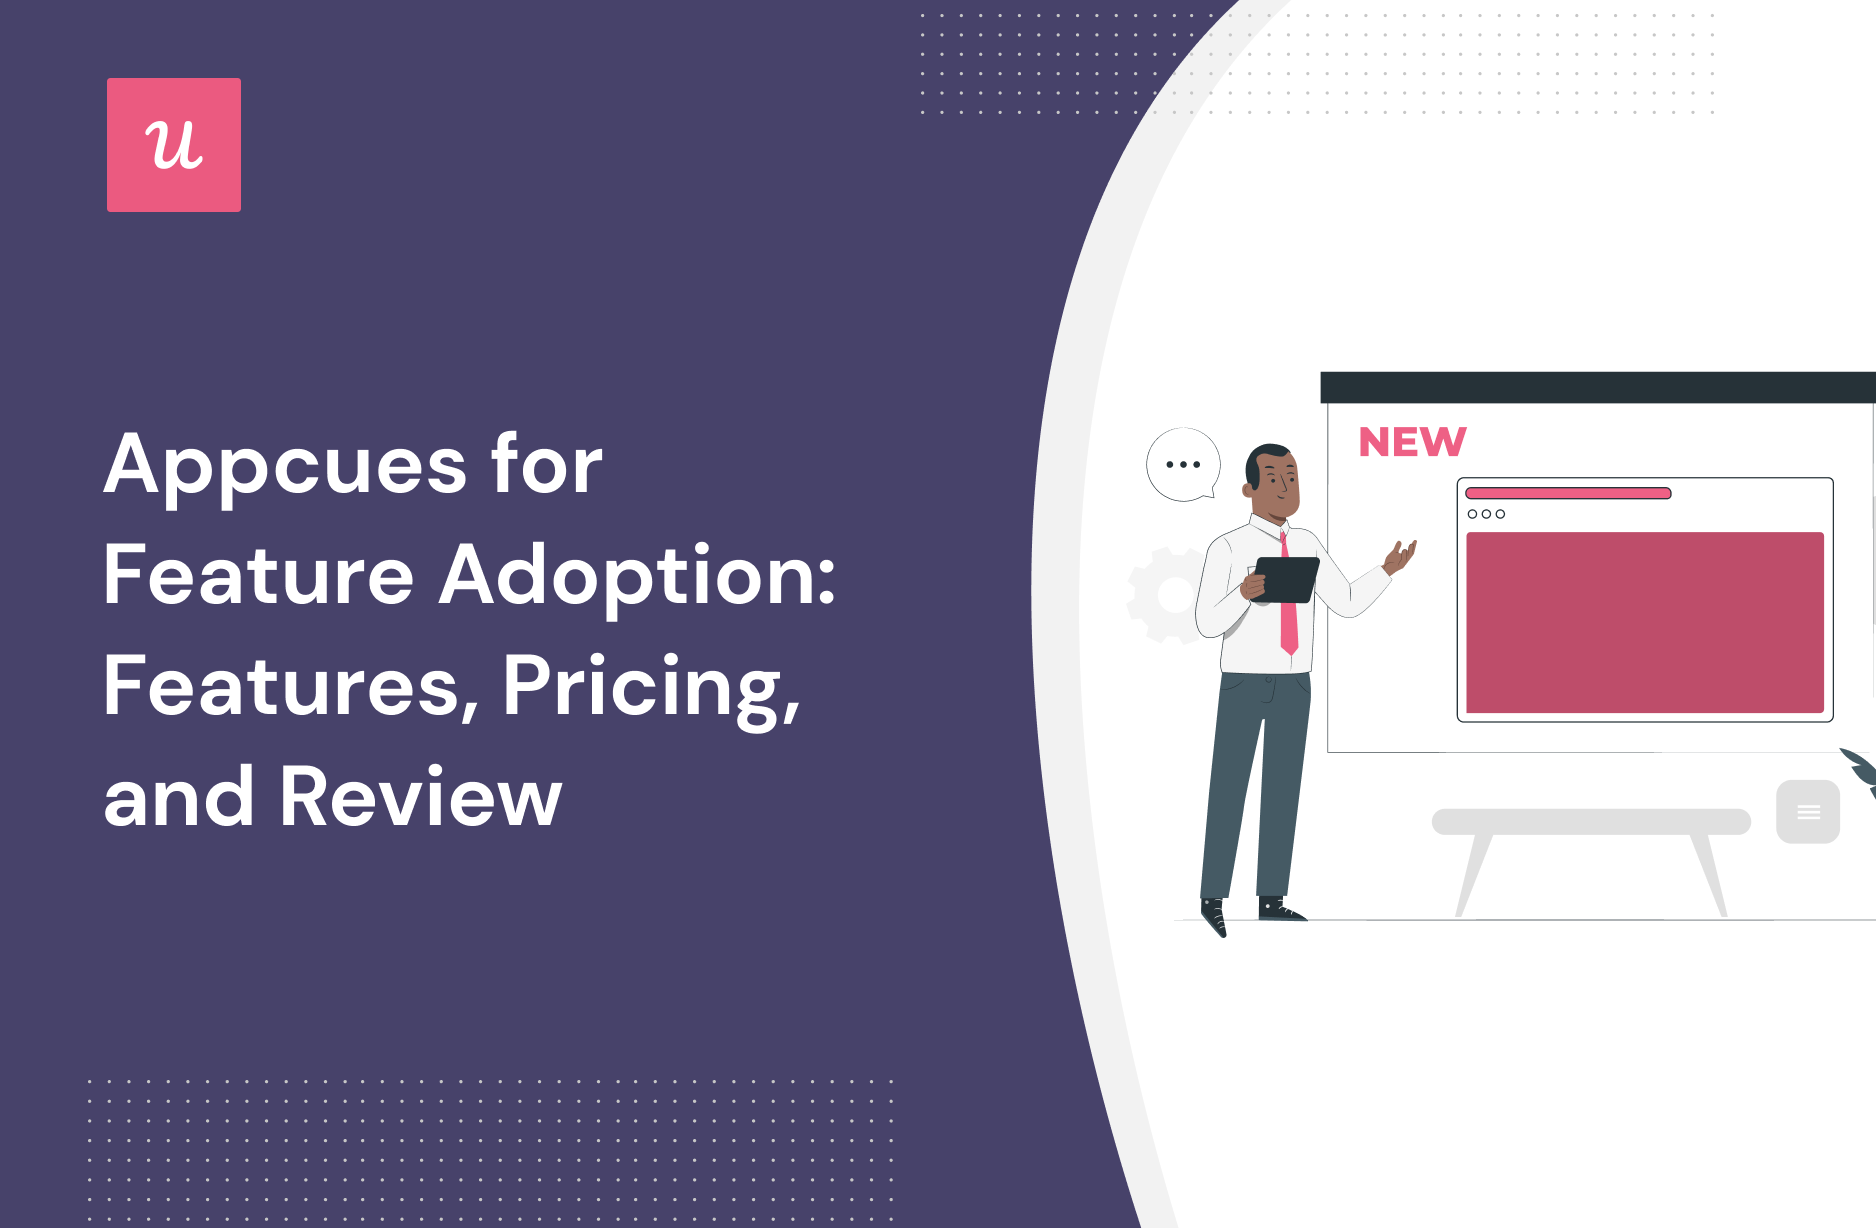 Appcues for Feature Adoption: Features, Pricing, and Review